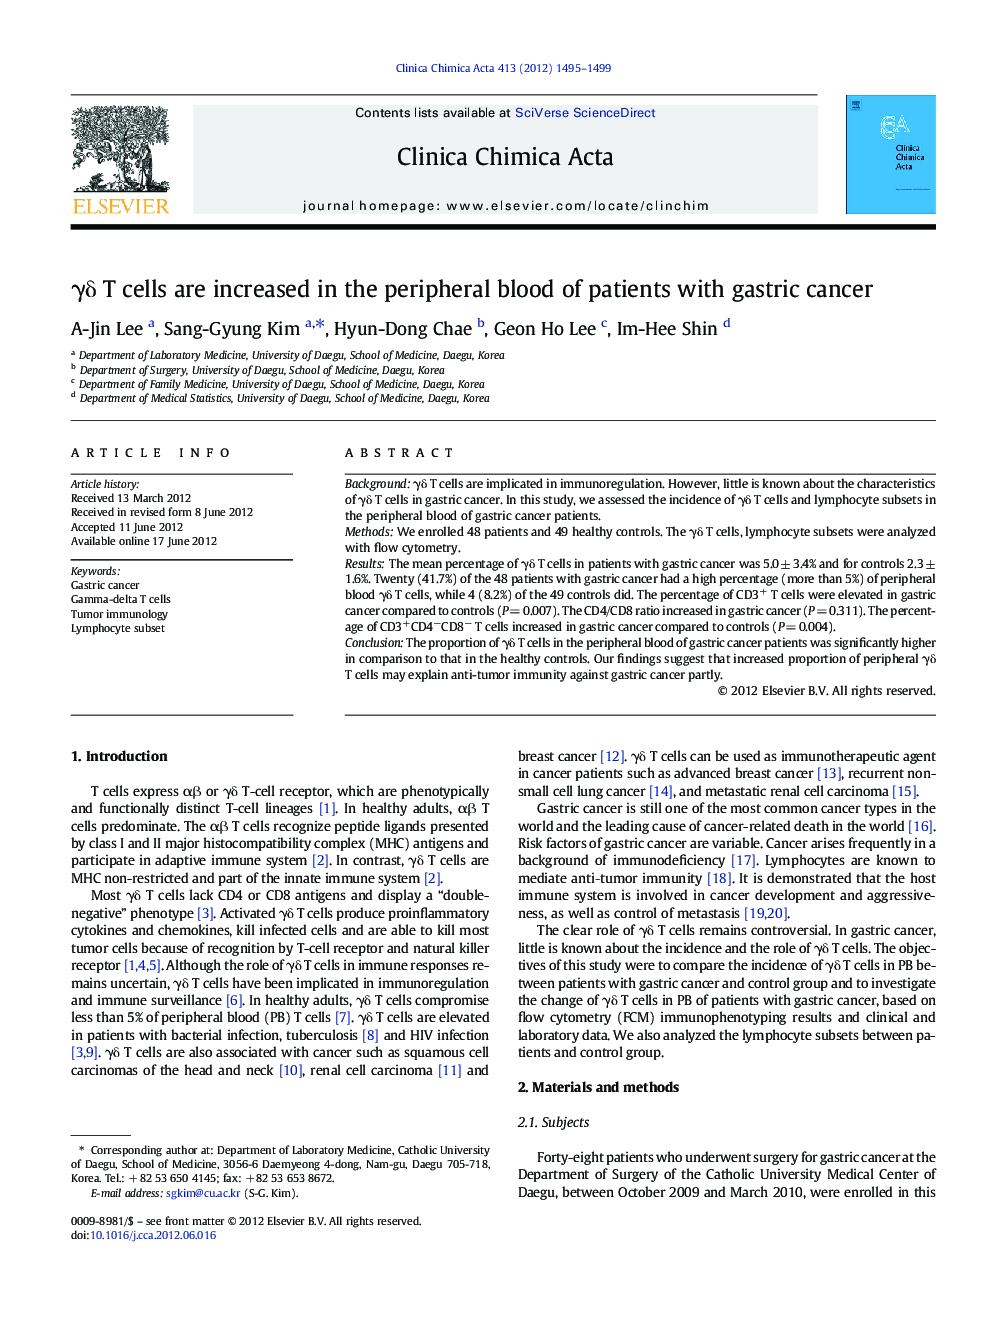 Î³Î´ T cells are increased in the peripheral blood of patients with gastric cancer